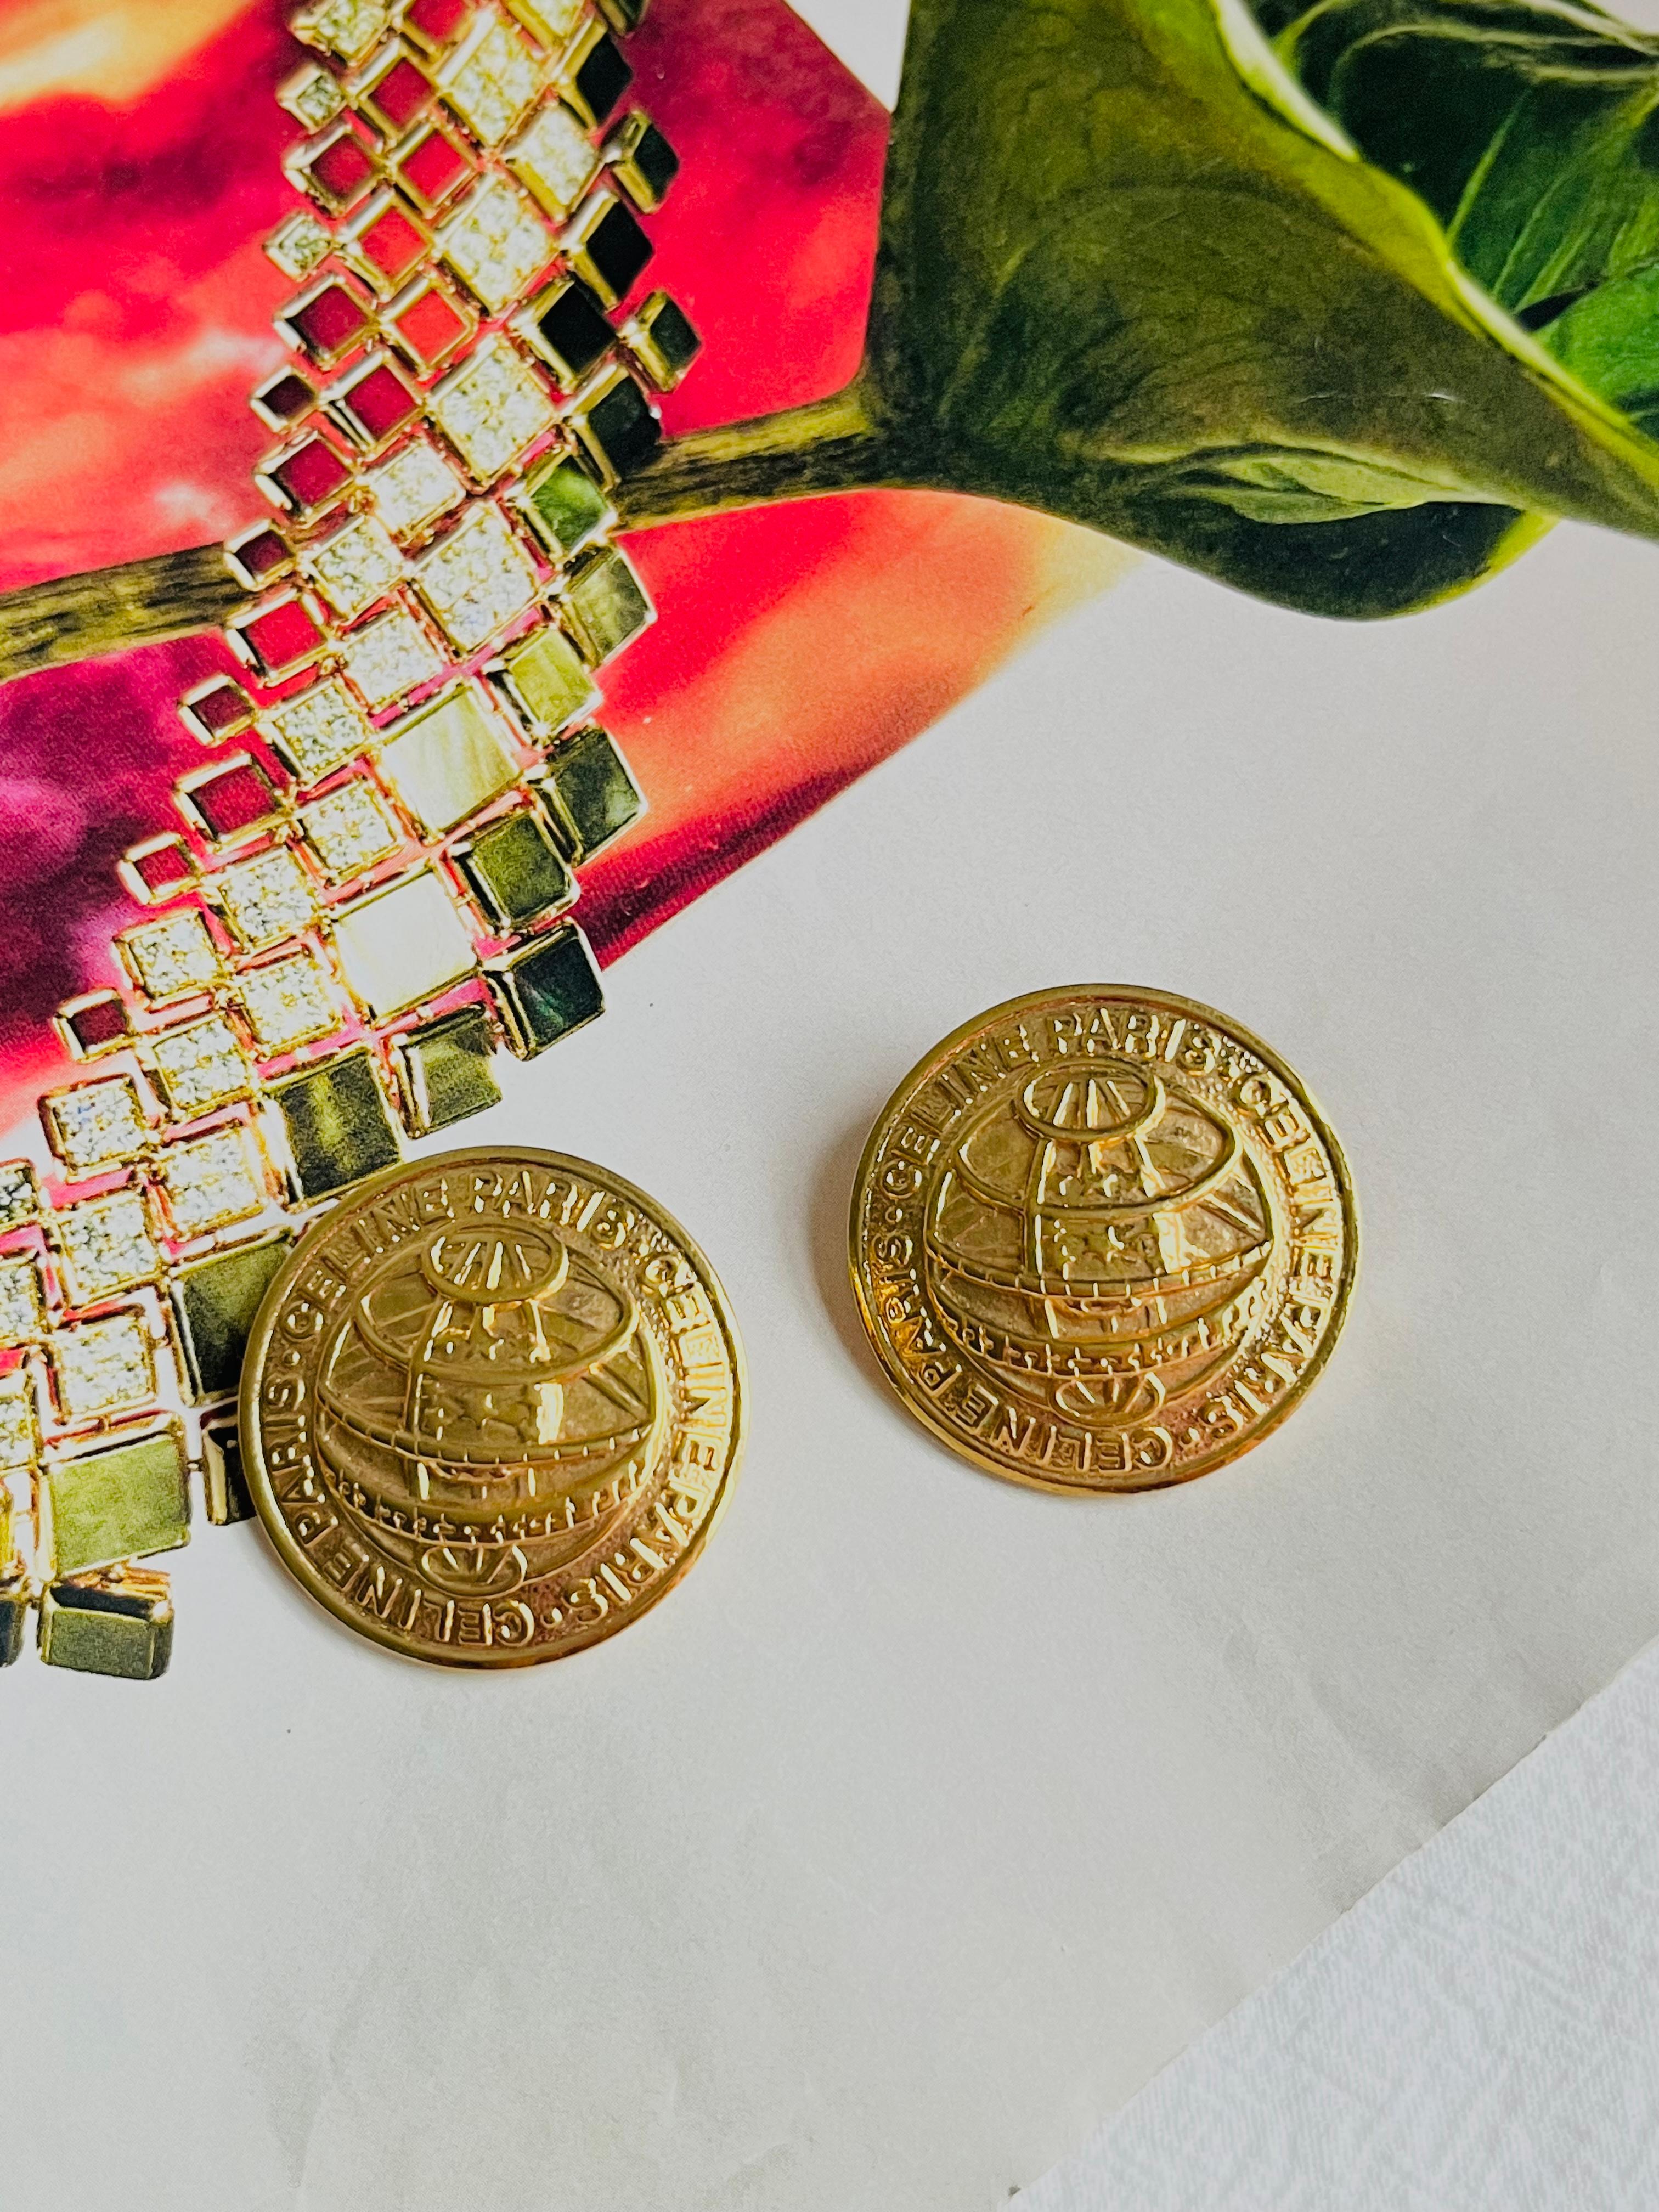 Celine 1992 Vintage Iconic Logo Medallion Circle Earth Globe Clip Earrings, Gold Plated

Very good condition. 100% Genuine. One back of earring is colour loss, others are excellent condition.

A very beautiful pair of earrings by CELINE, signed at